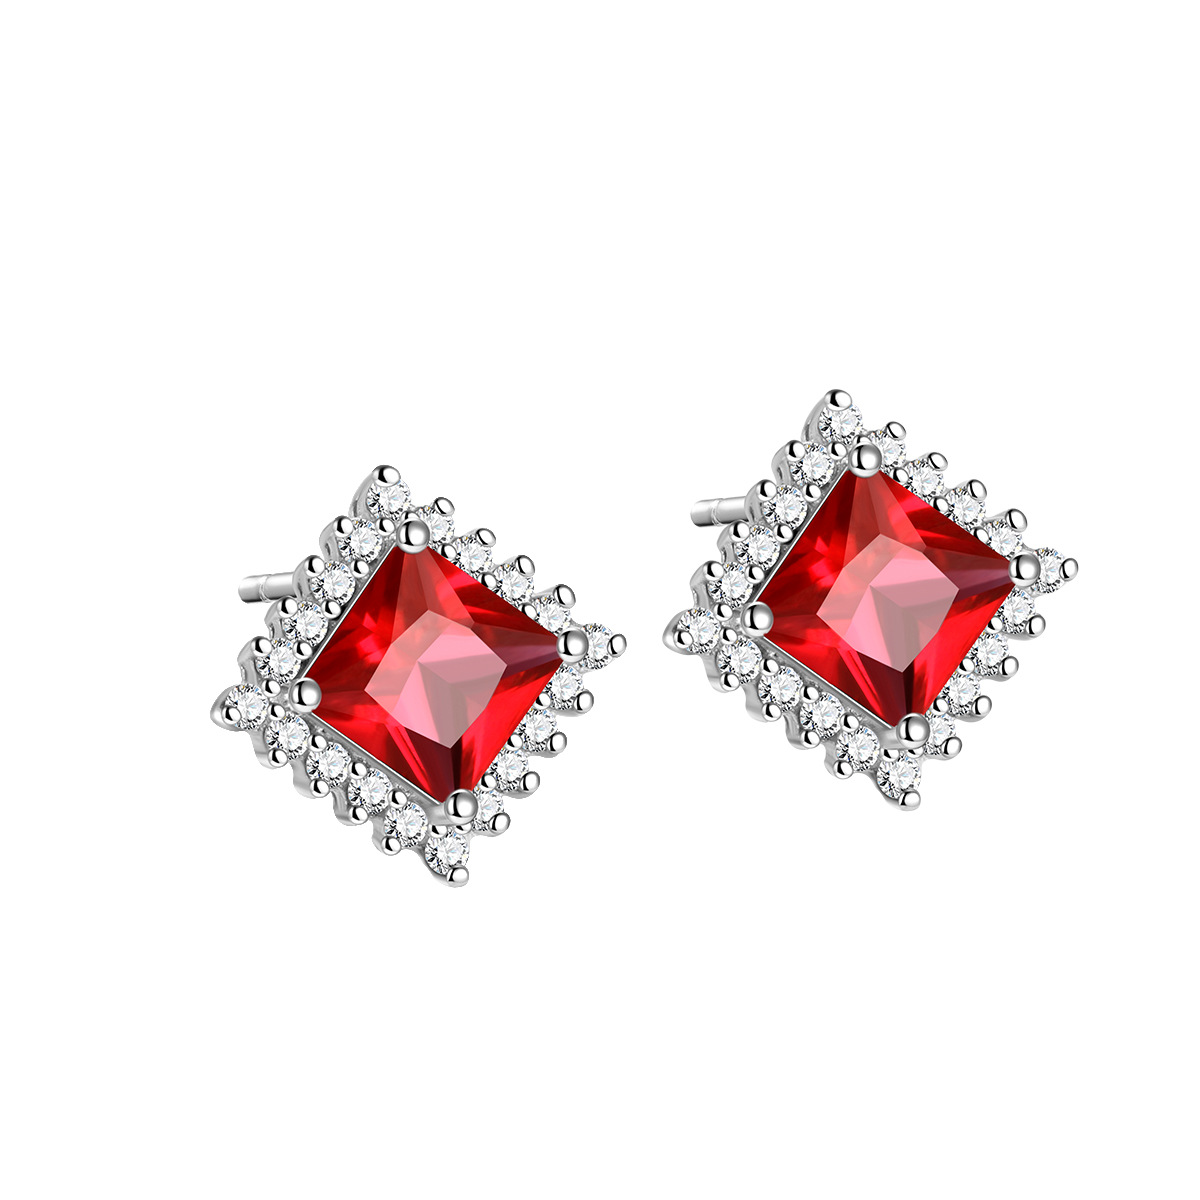 White gold red stone